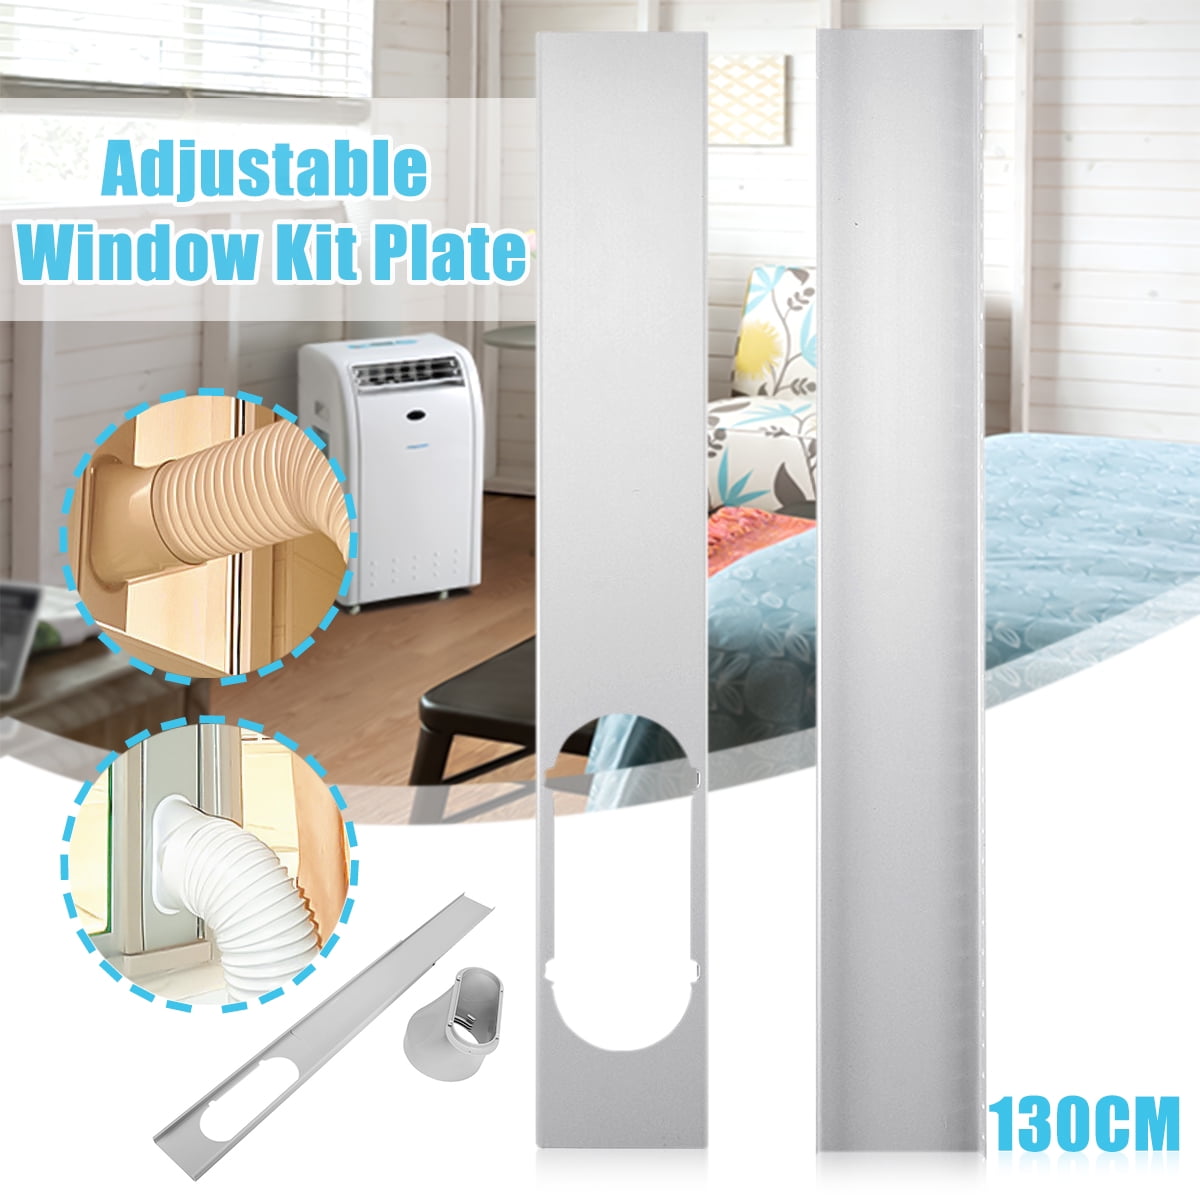 2pcs Adjustable Window Slide Kit Plate Air Conditioner Wind Shield For Portable 